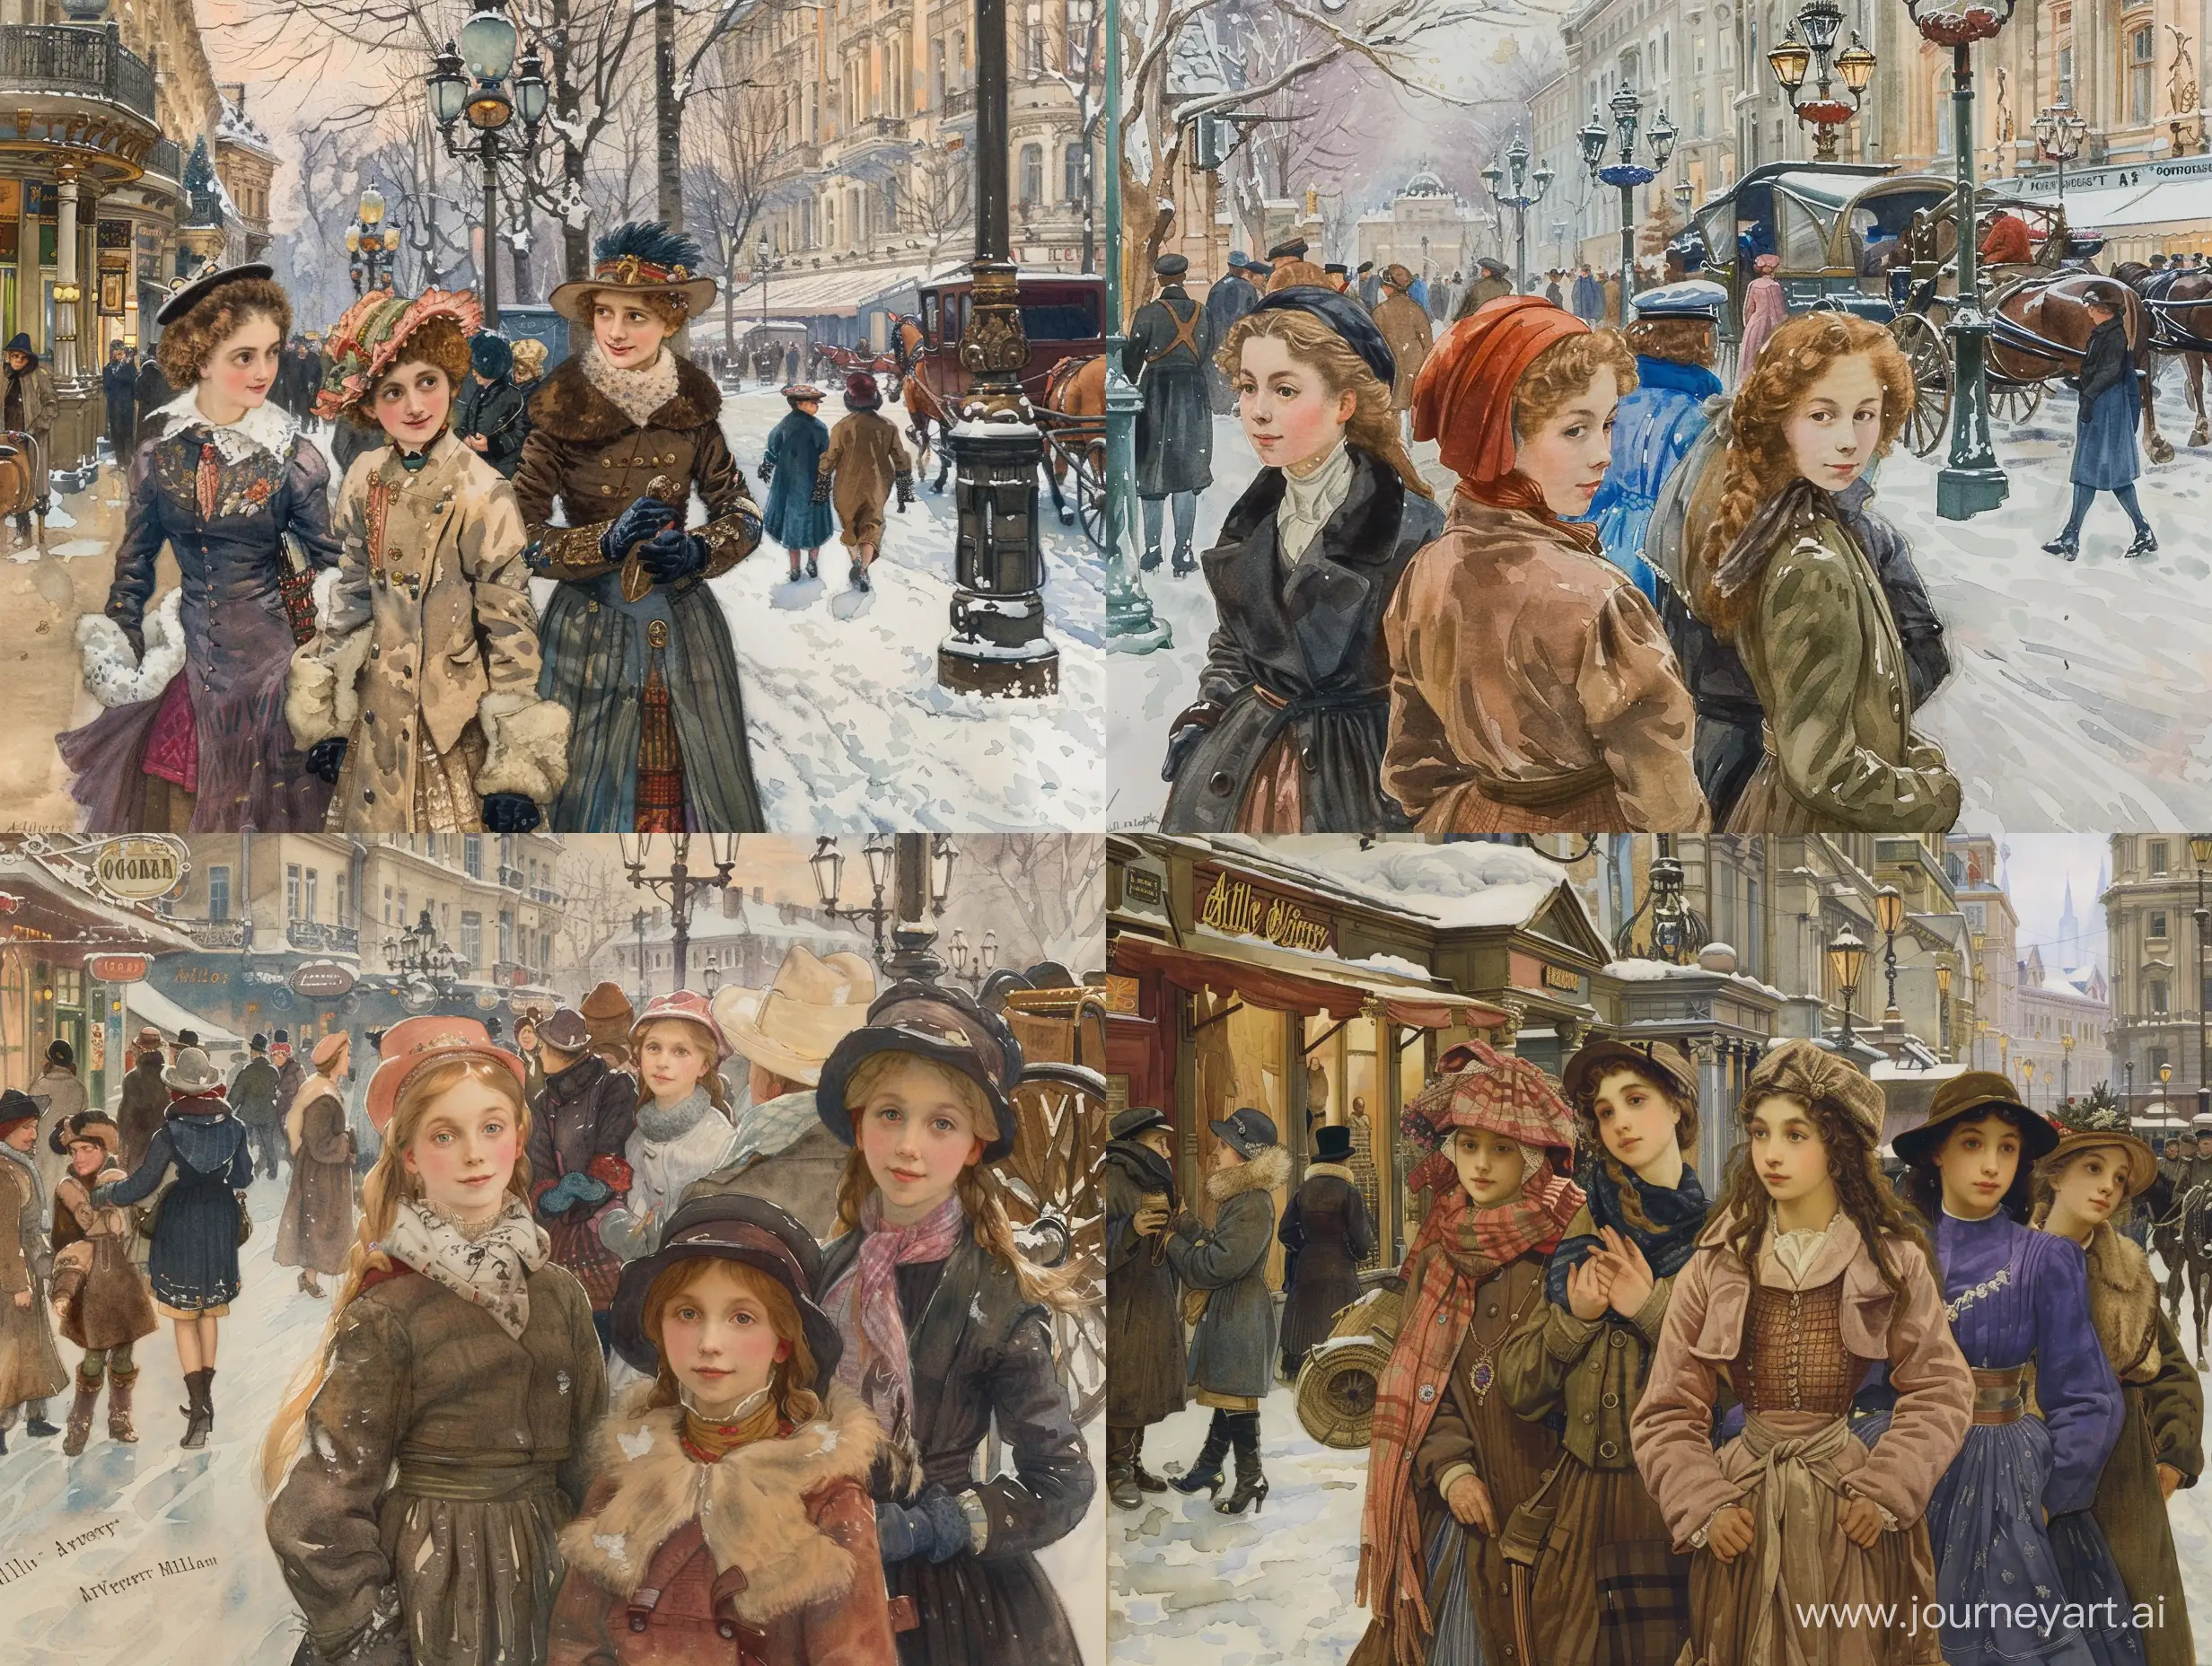 Subject: The central theme of the image is a winter scene in Moskau in 1910, capturing the essence of a busy street Arbat. The focus is on a group of elegant girls, highlighting the fashion and lifestyle of the time. The artist, John Everett Millais, skillfully brings the historic setting to life through his Wathercolor painting. Setting: The background features a bustling street in Moskau during winter, creating a lively atmosphere with people engaging in various activities. The winter setting adds a charming touch, with perhaps snow-covered streets and vintage architecture Arbat. Style/Coloring: Millais employs the classic style of oil painting, using rich and warm colors to evoke the ambiance of the early 20th century. The winter palette may include cool tones like blues and grays, contrasting with the vibrant colors of the girls' clothing. Action: The girls are depicted engaging in daily life activities, suggesting movement and vivacity. Millais captures the dynamic energy of the busy street, enhancing the narrative of the era. Items/Costume: The girls are likely adorned in fashionable clothing of the time, showcasing the trends and styles prevalent in 1910 Moskau. The painting may feature accessories such as hats, gloves, and other period-specific items. Appearance: The characters' appearances are refined and sophisticated, reflecting the societal norms and fashion of the early 20th century. Millais pays attention to detail, emphasizing the unique facial expressions and features of each individual. Accessories: The accessories in the painting, such as street lamps, horse-drawn carriages, and storefronts, contribute to the historical context. These details add depth and authenticity to the overall composition.